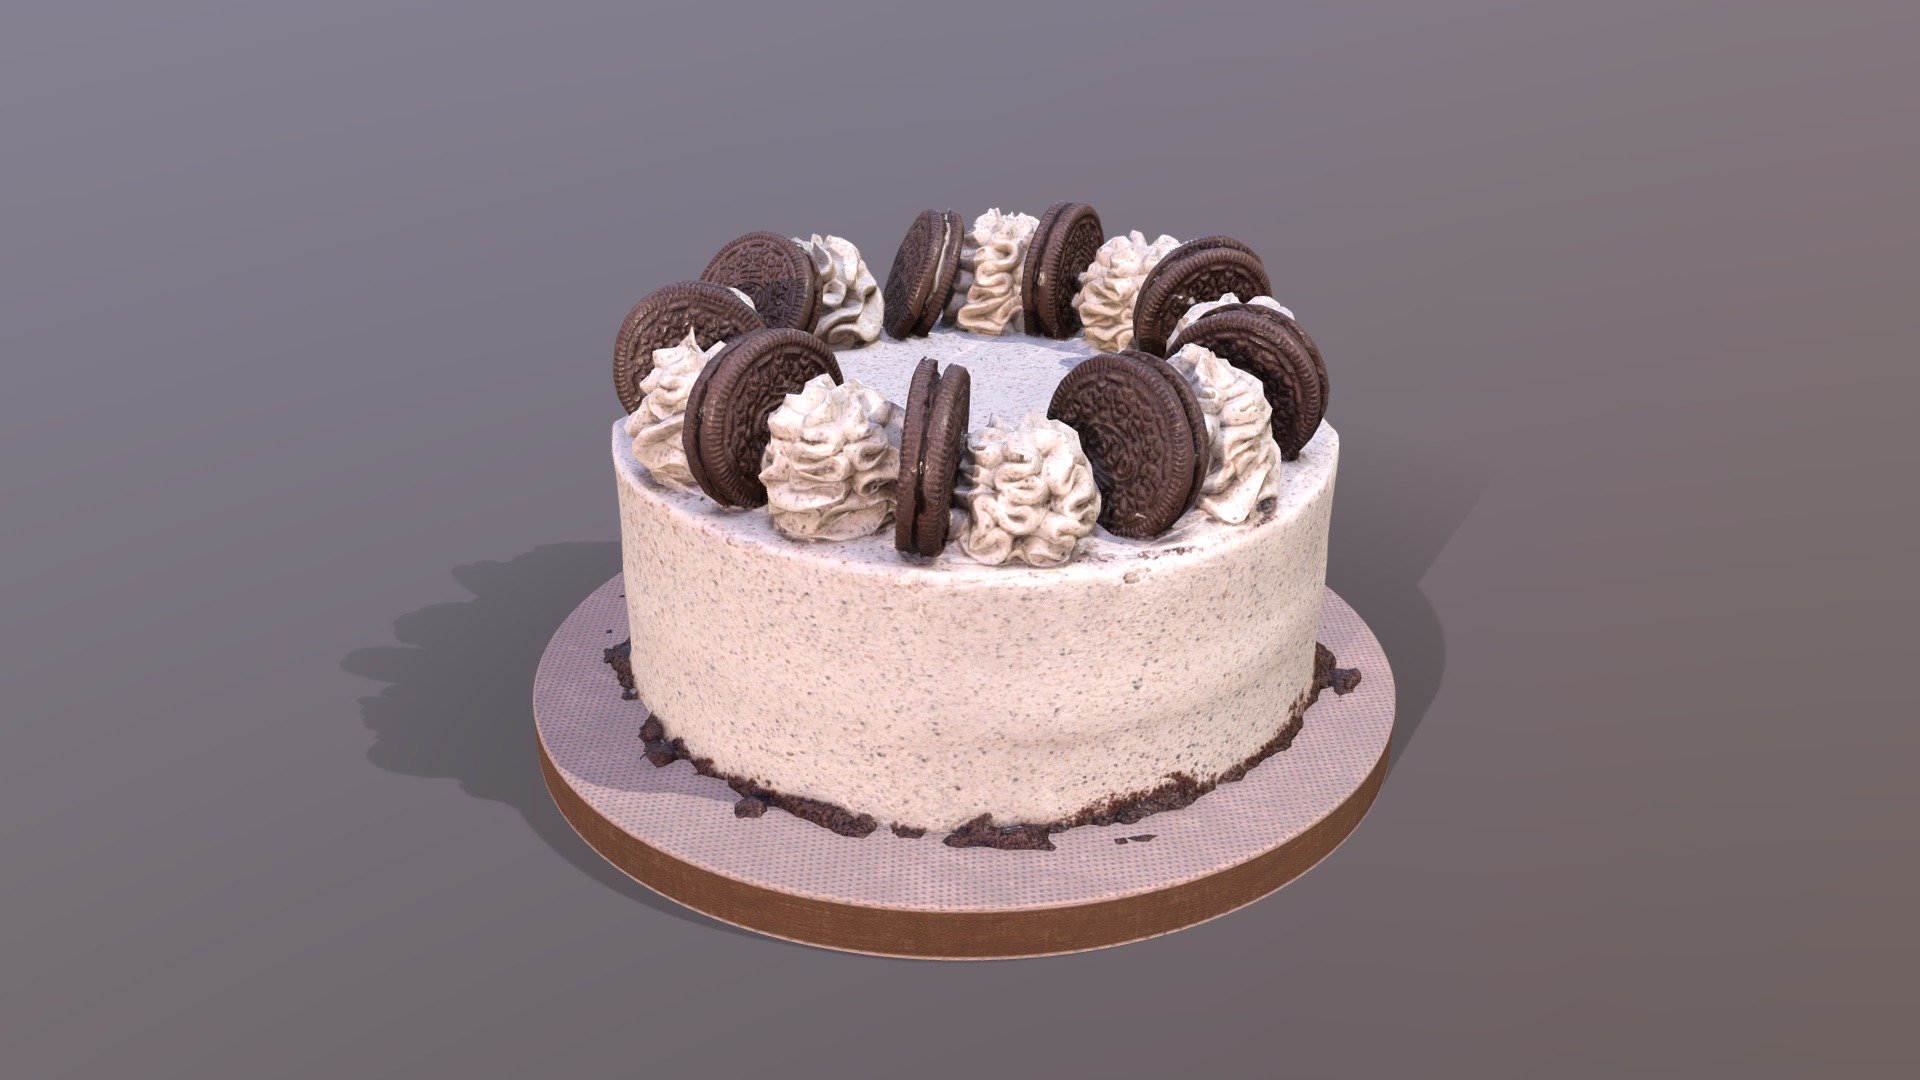 This premium Oreo Cookie Cake was created using photogrammetry which is made by CAKESBURG Premium Cake Shop in the UK. You can purchase real cake from this link: https://cakesburg.co.uk/collections/classic-cakes/products/cookies-and-cream-cake

Slice Textures 4096*4096px PBR photoscan-based materials (Base Color, Normal, Roughness, Specular, AO)

Click here for the cut version.
**
Click here for a slice of cake model 3d model